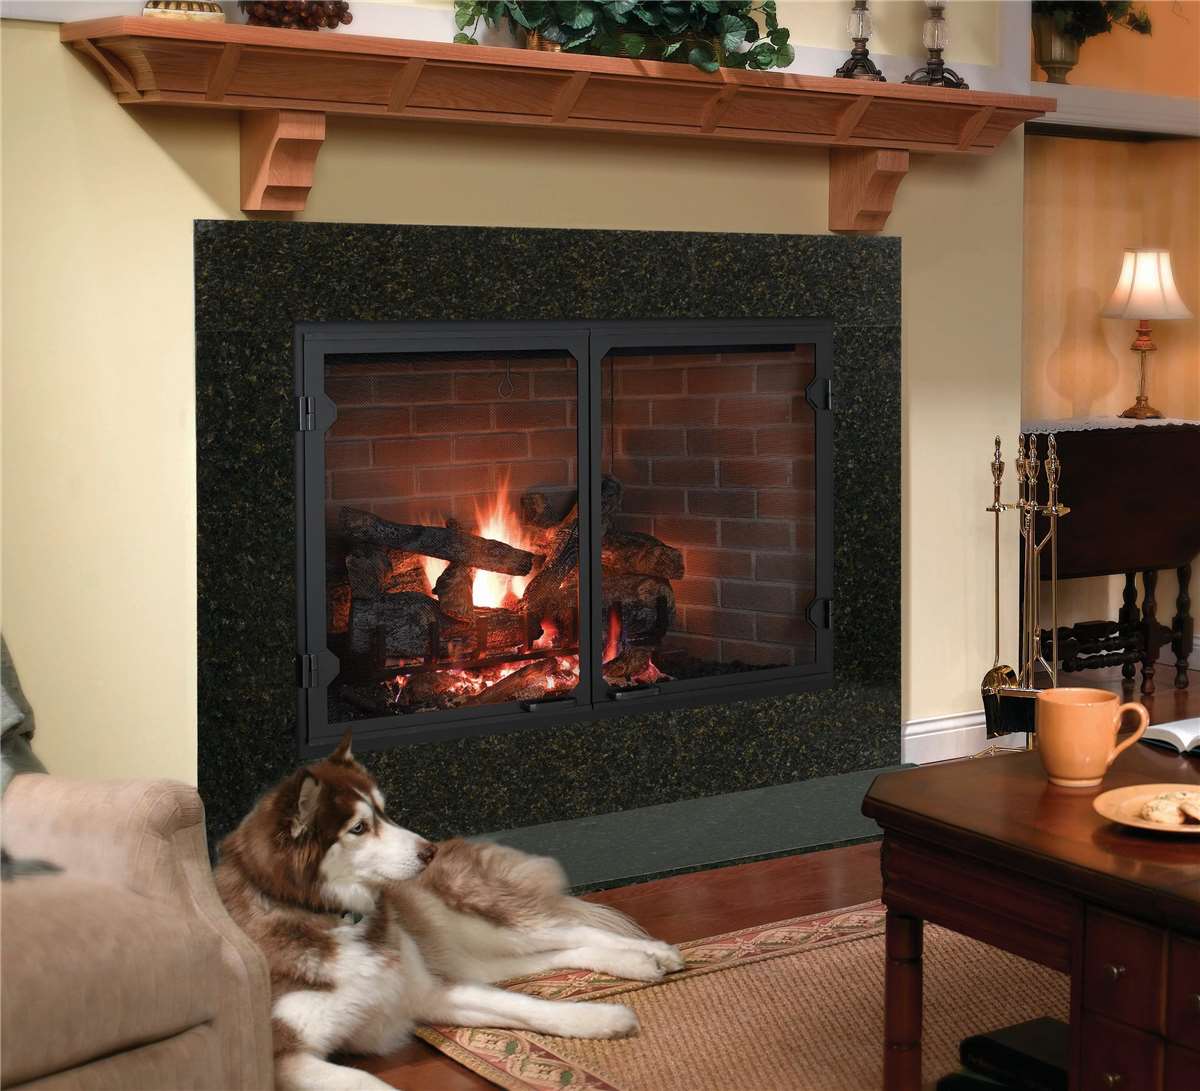 Heatilator ICON 100 (50" width fireplace) with Grand Vista front and traditional refractory liner.